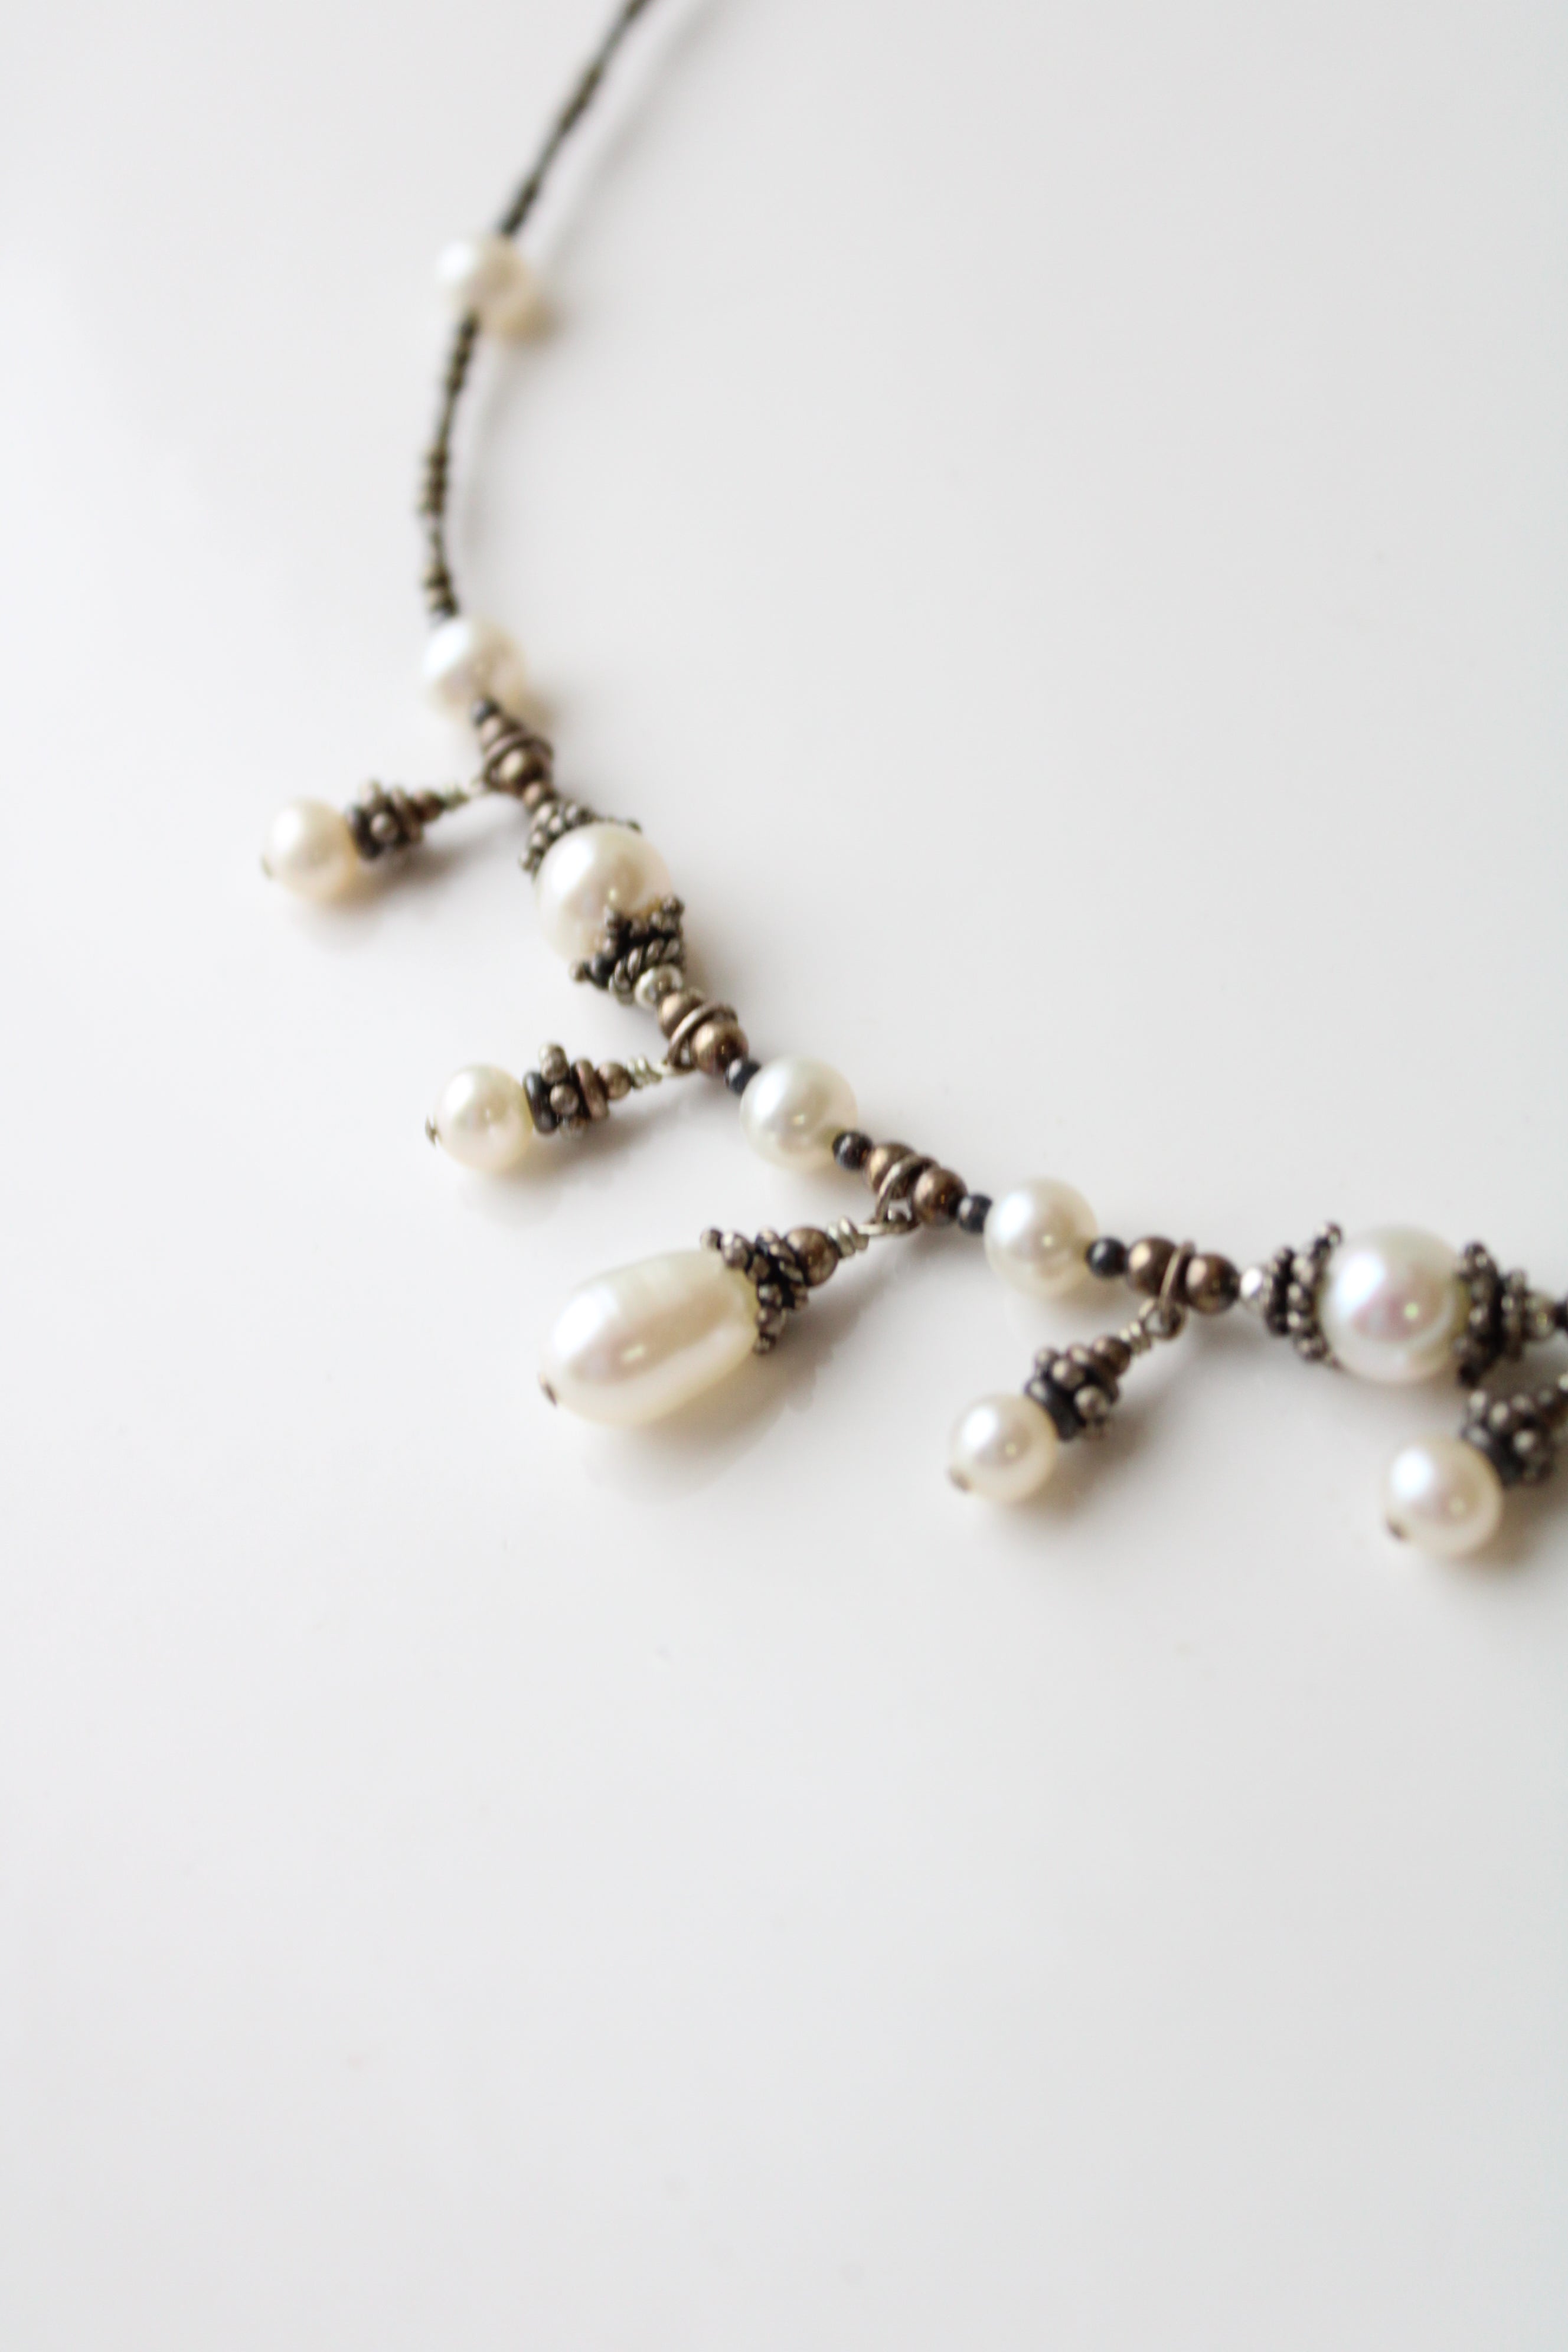 Genuine Pearl Sterling Silver Beaded Necklace